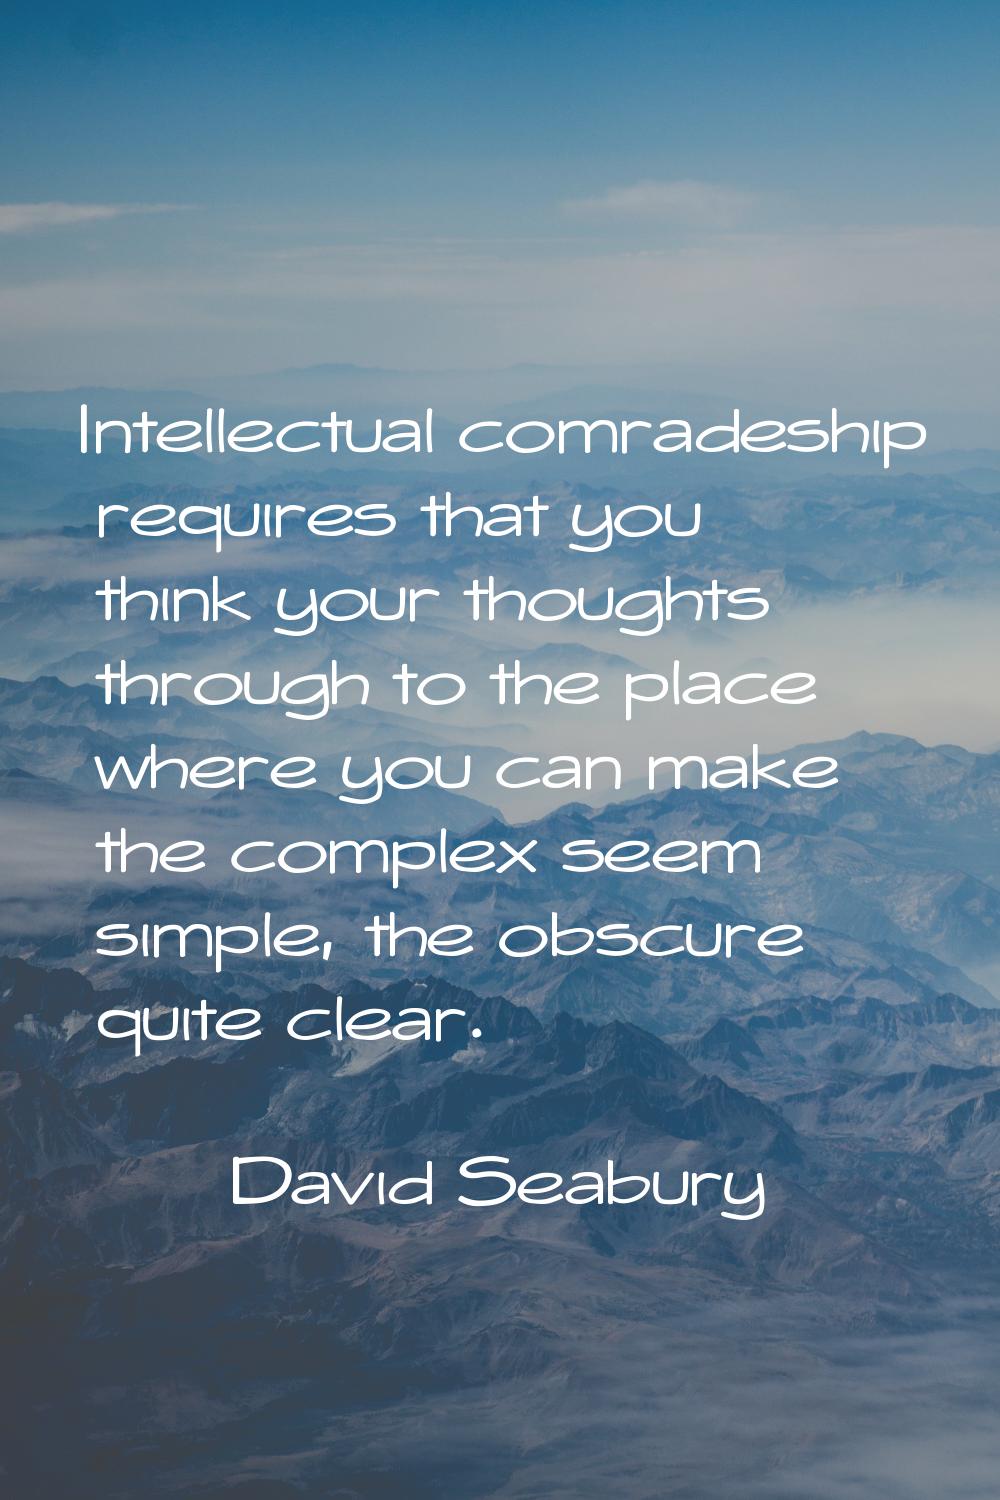 Intellectual comradeship requires that you think your thoughts through to the place where you can m